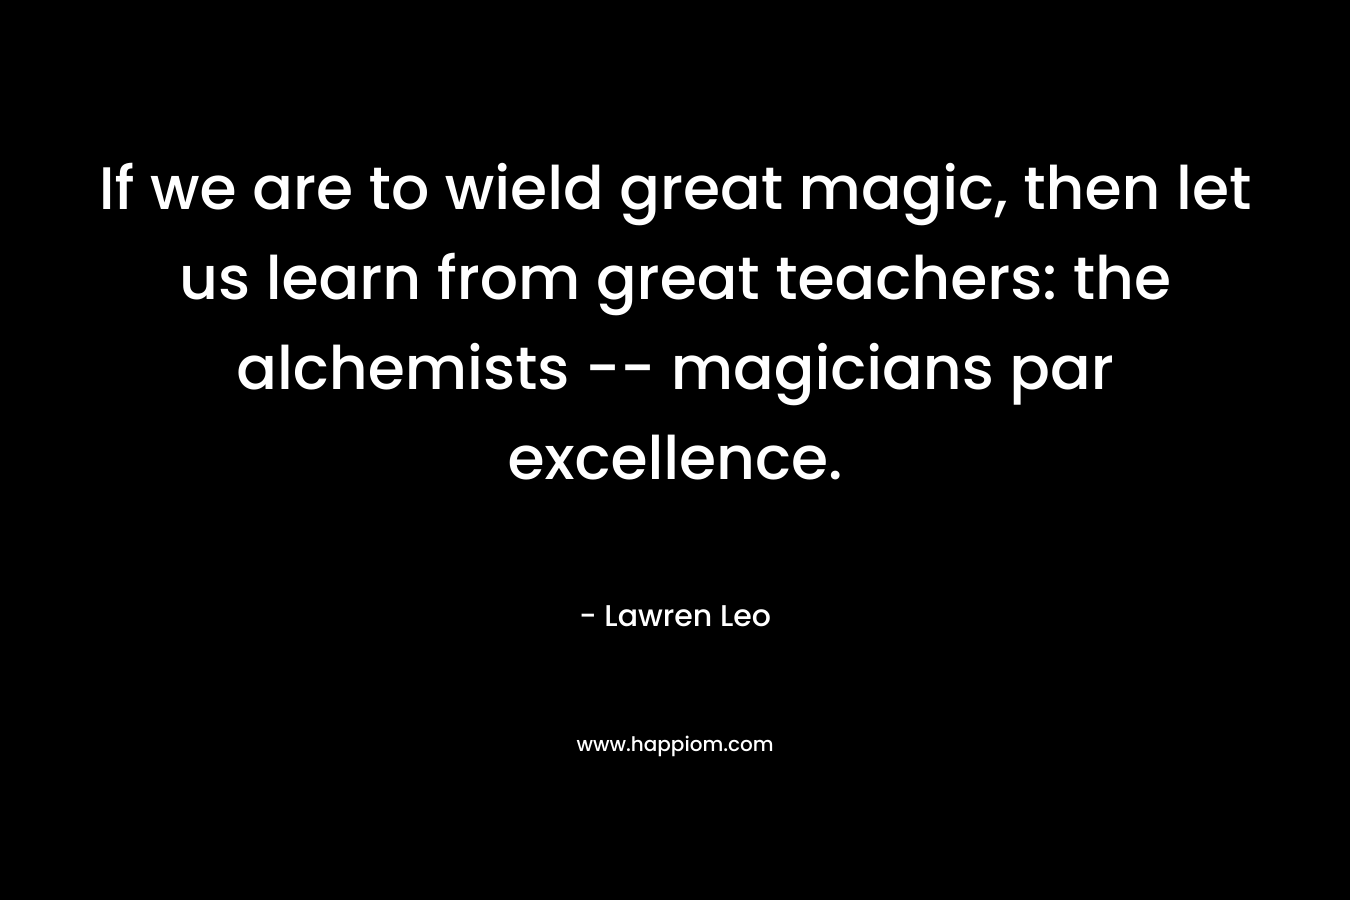 If we are to wield great magic, then let us learn from great teachers: the alchemists -- magicians par excellence.